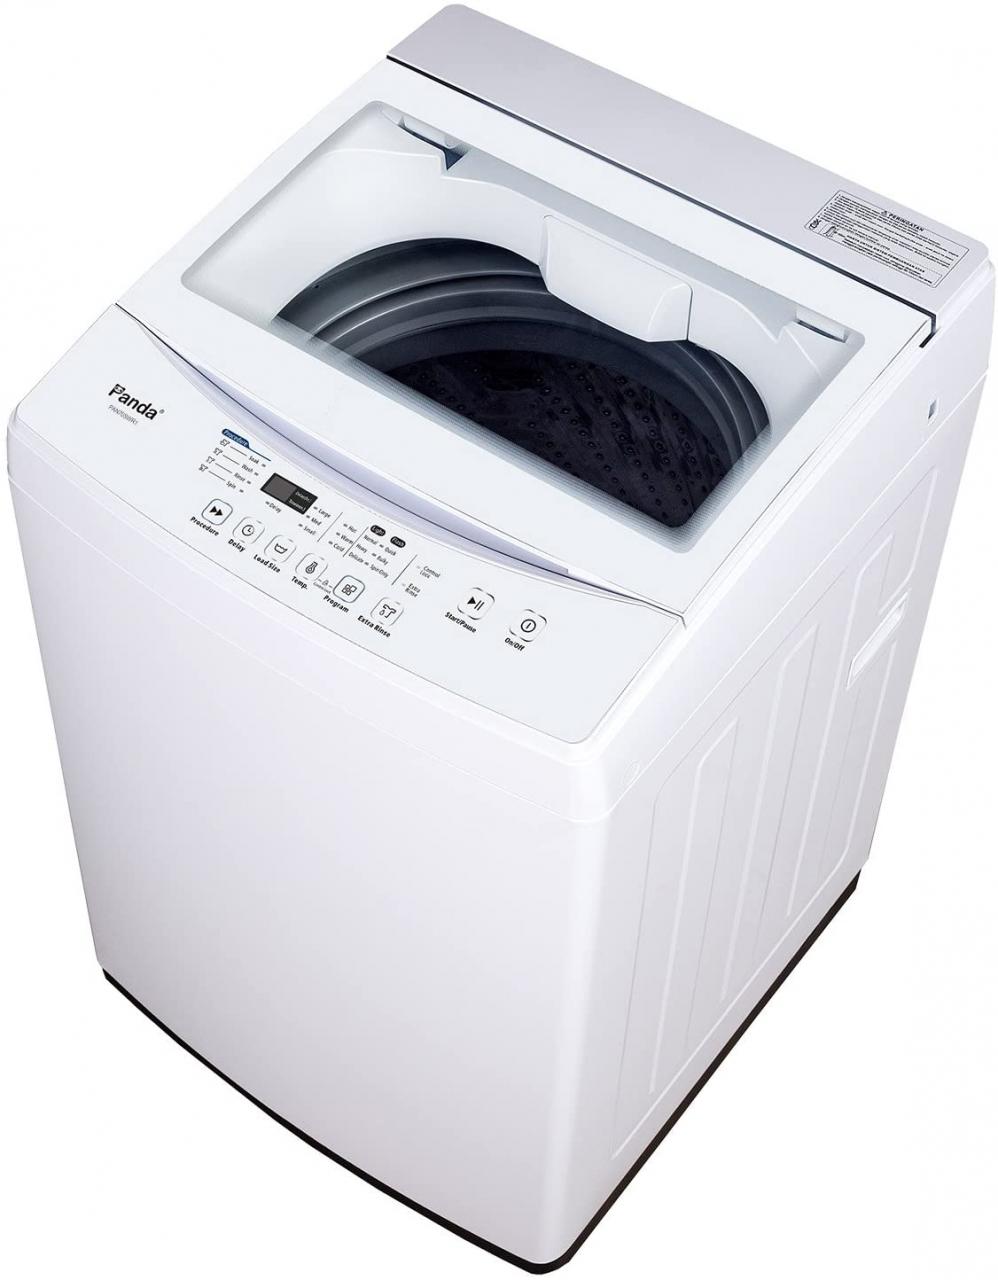 Buy Panda Portable Washing Machine, 10lbs Capacity, 10 Wash Programs, 2  built in rollers/casters, Compact Top Load Cloth Washer, 1.34 Cu.ft Online  in Hong Kong. 810721978